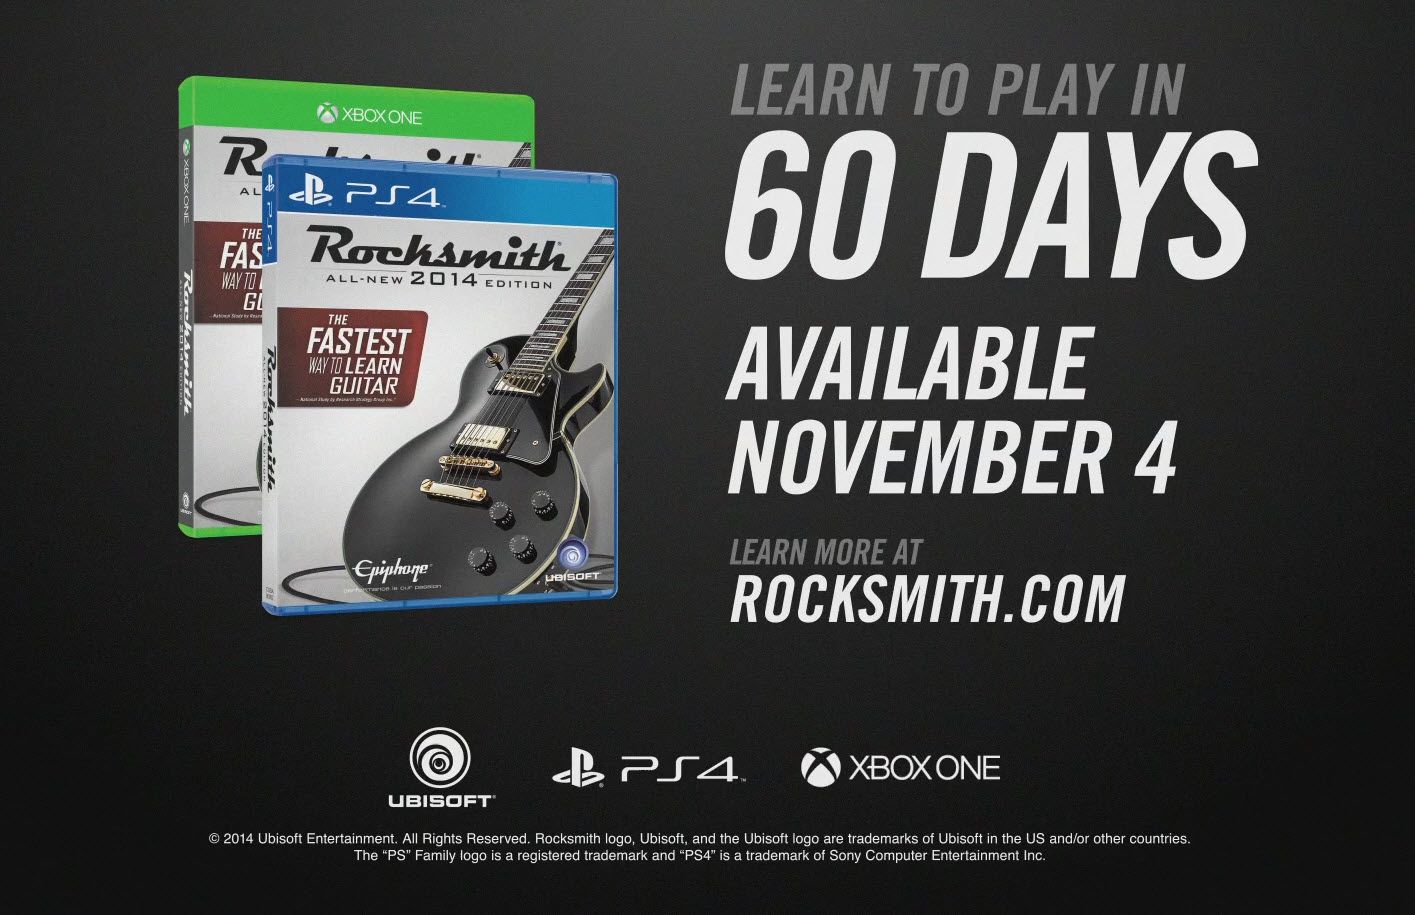 Rocksmith 2014 Edition Remastered Xbox One with Cable